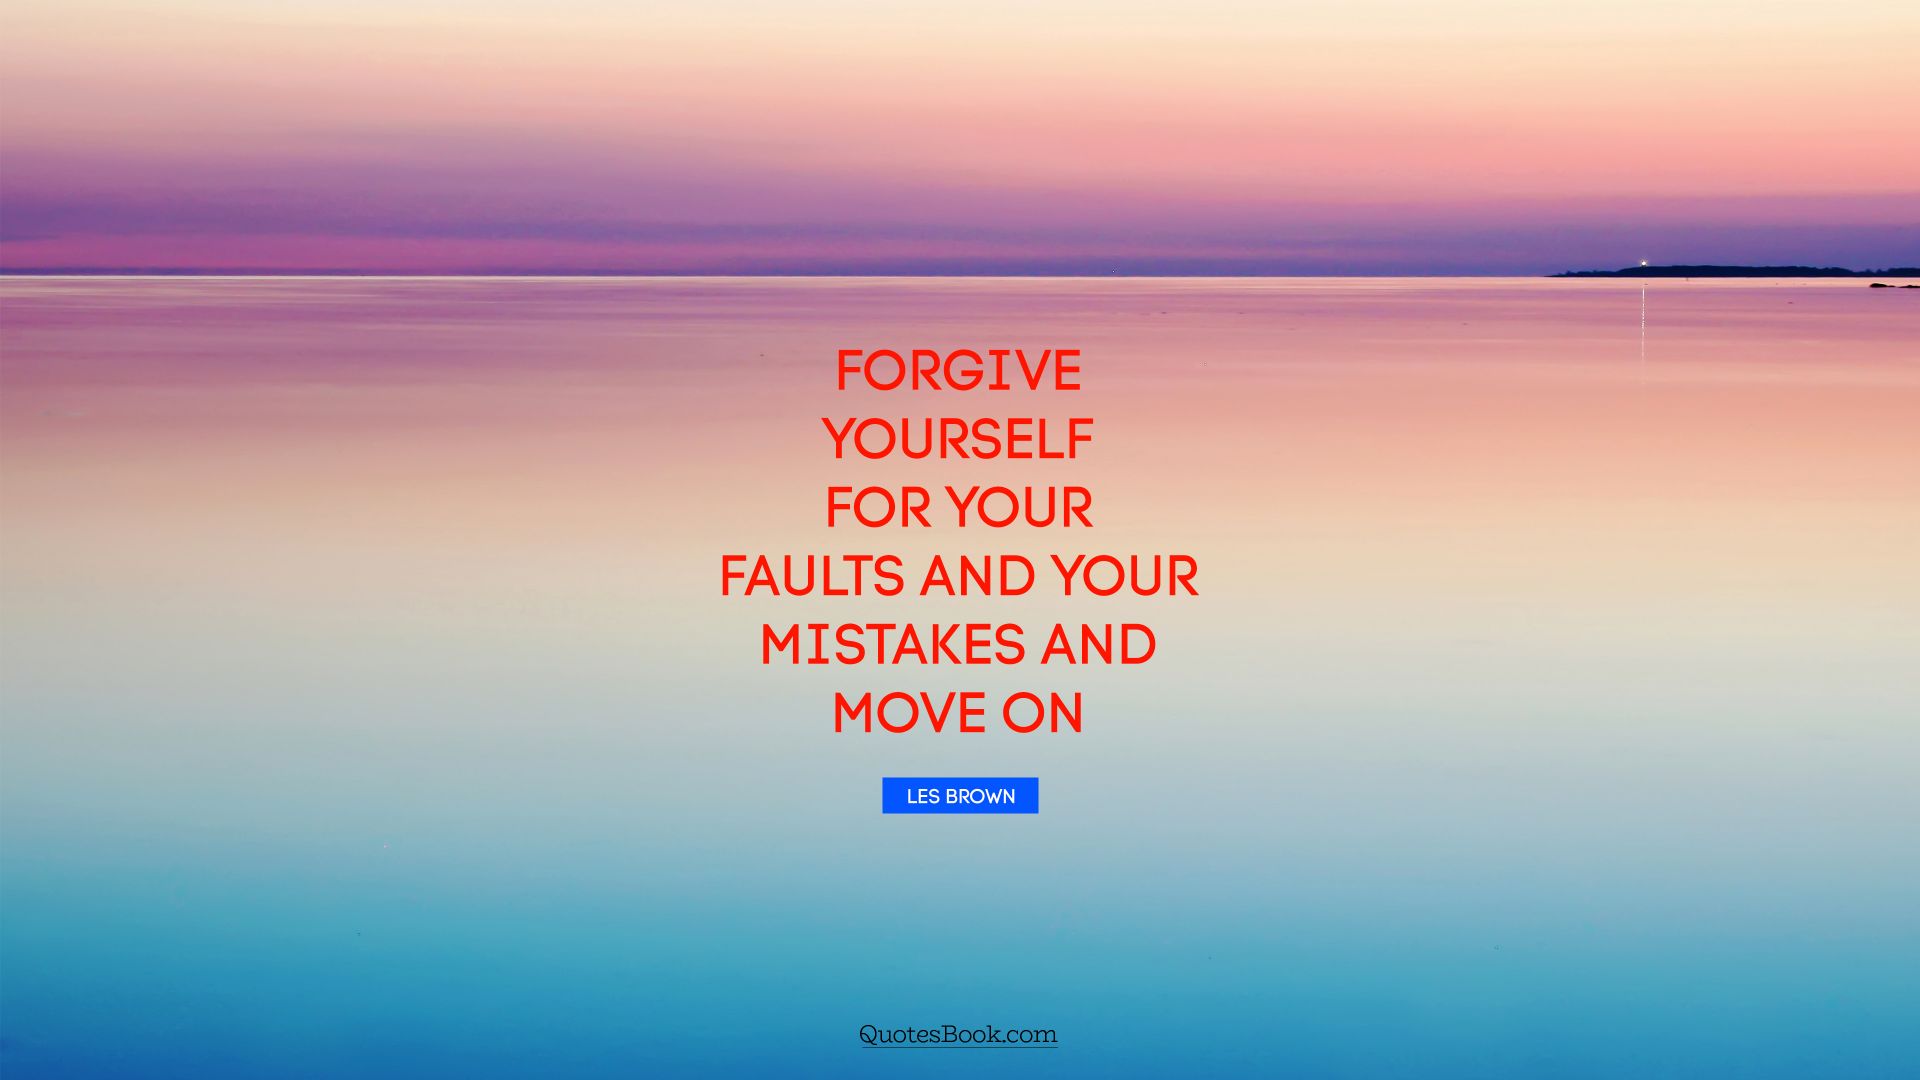 Forgive yourself for your faults and your mistakes and move on. - Quote by Les Brown